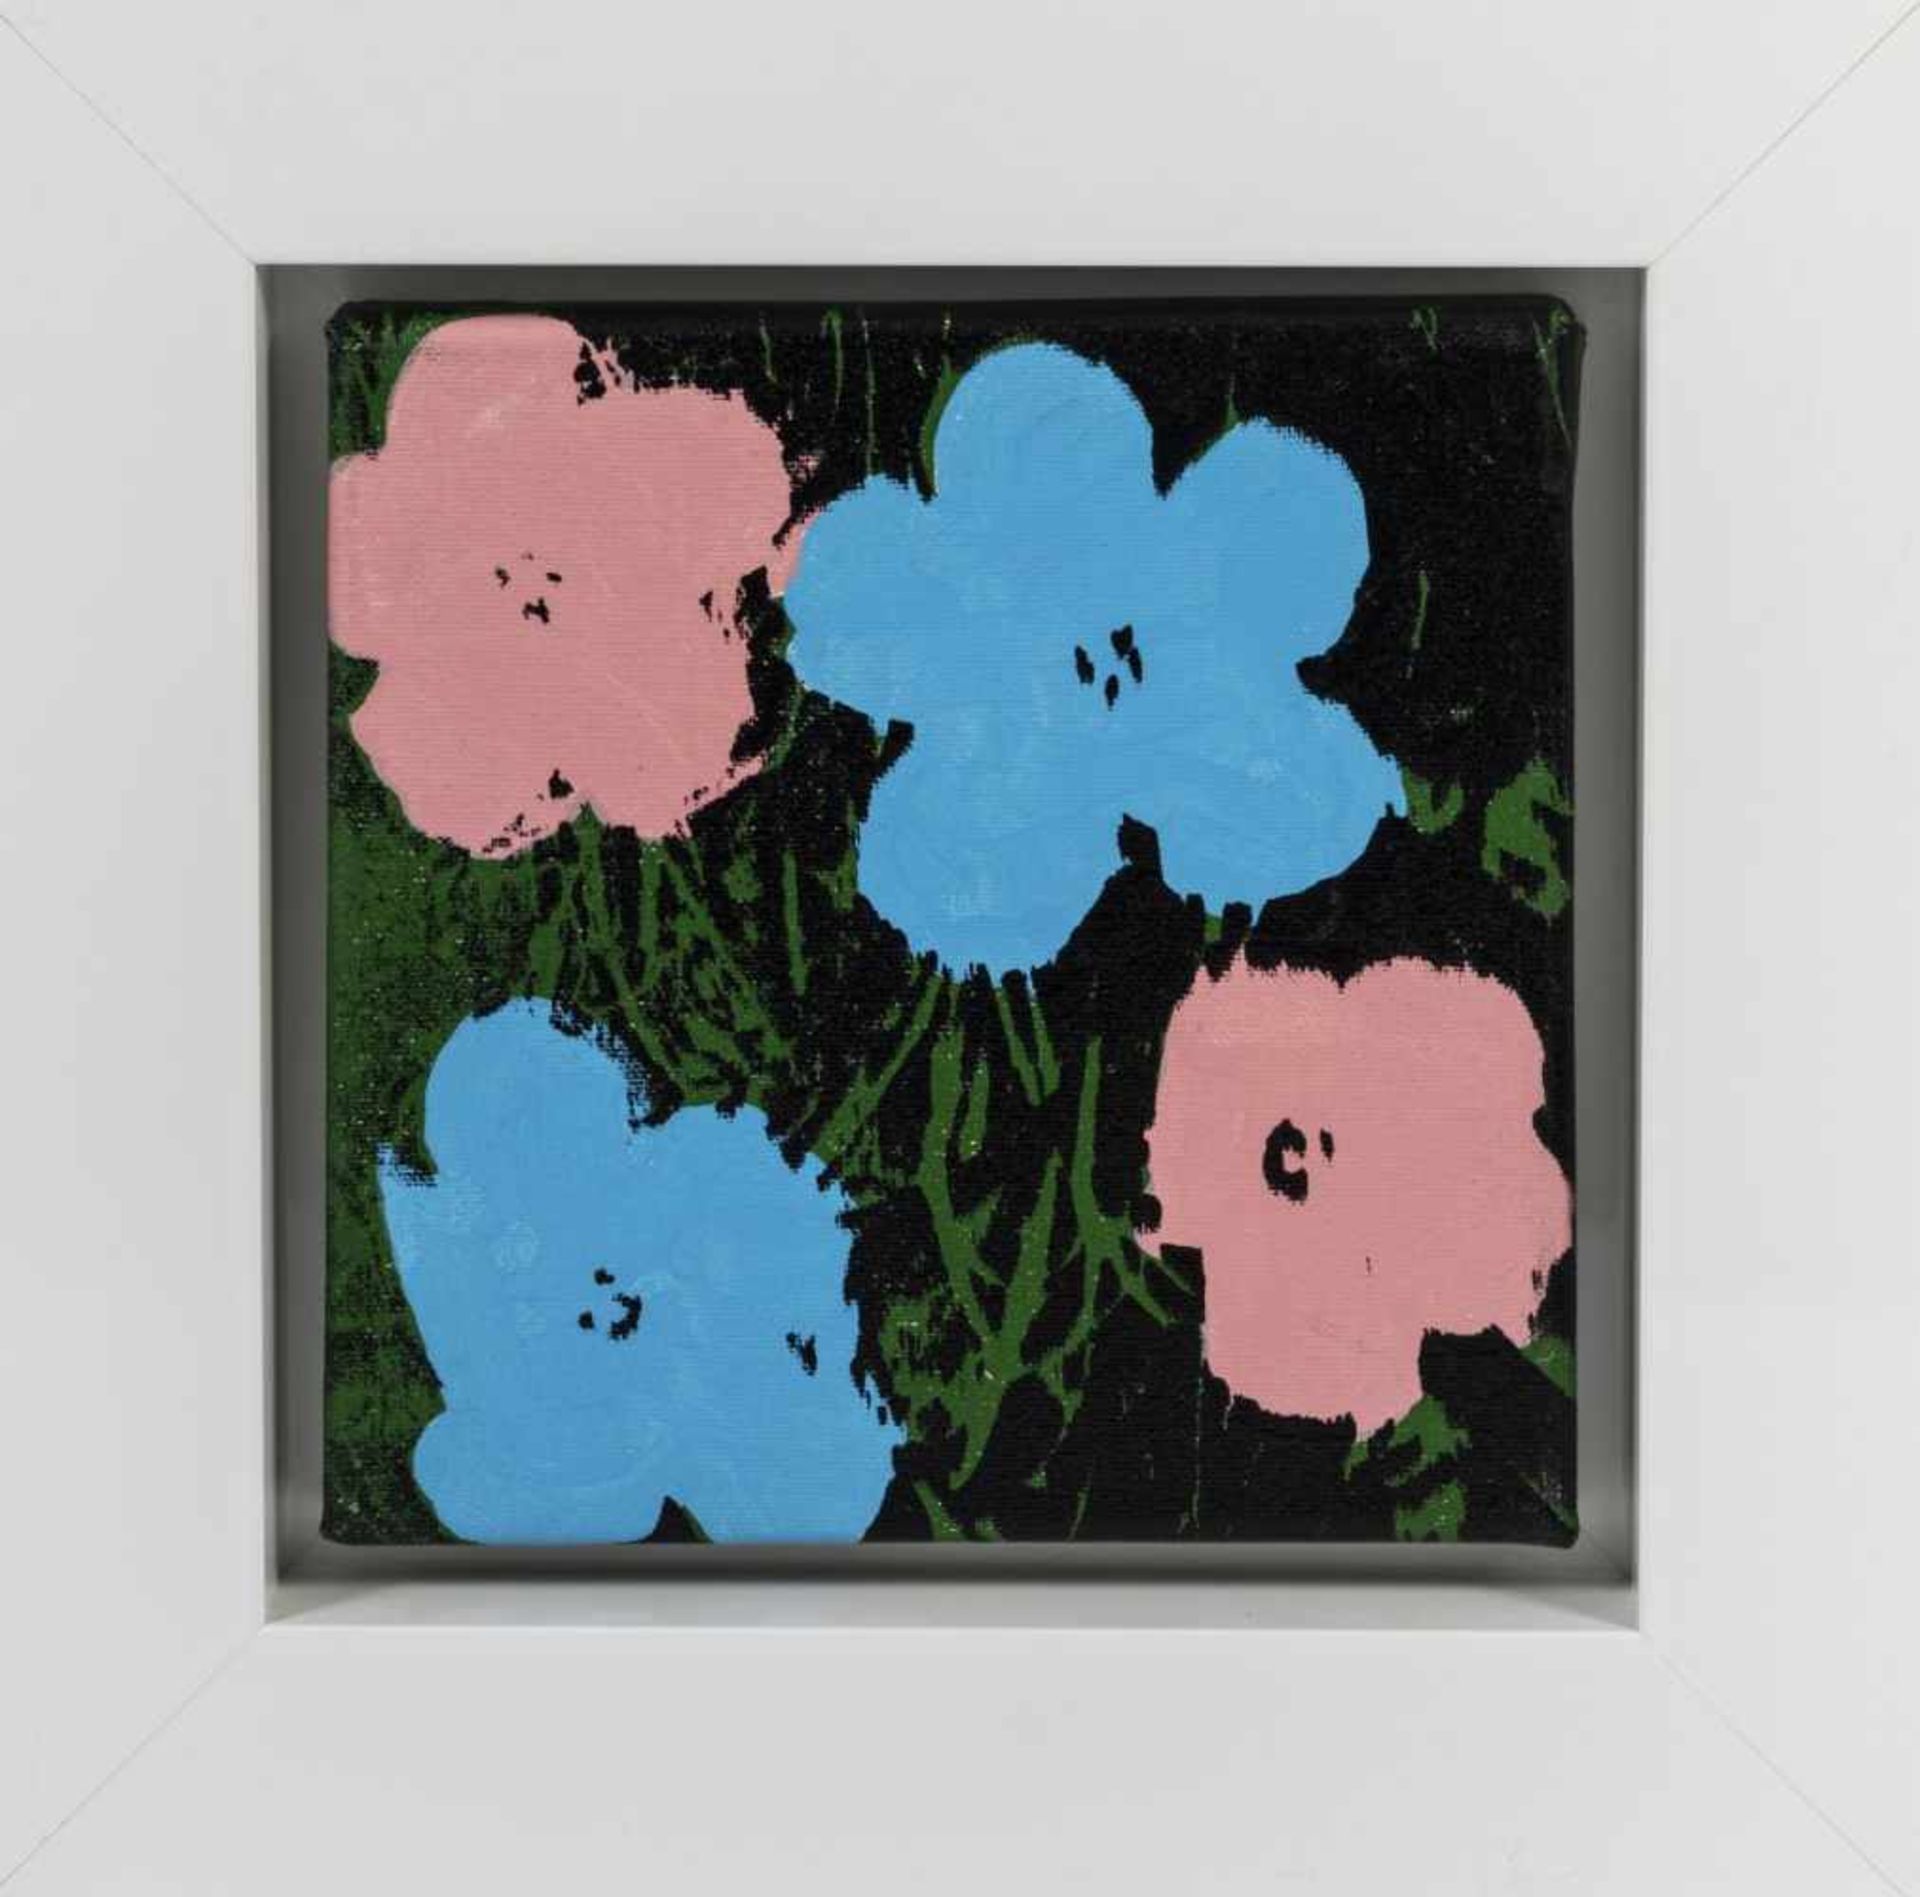 after Andy Warhol, after 'Flowers' (Blue and Pink), undated